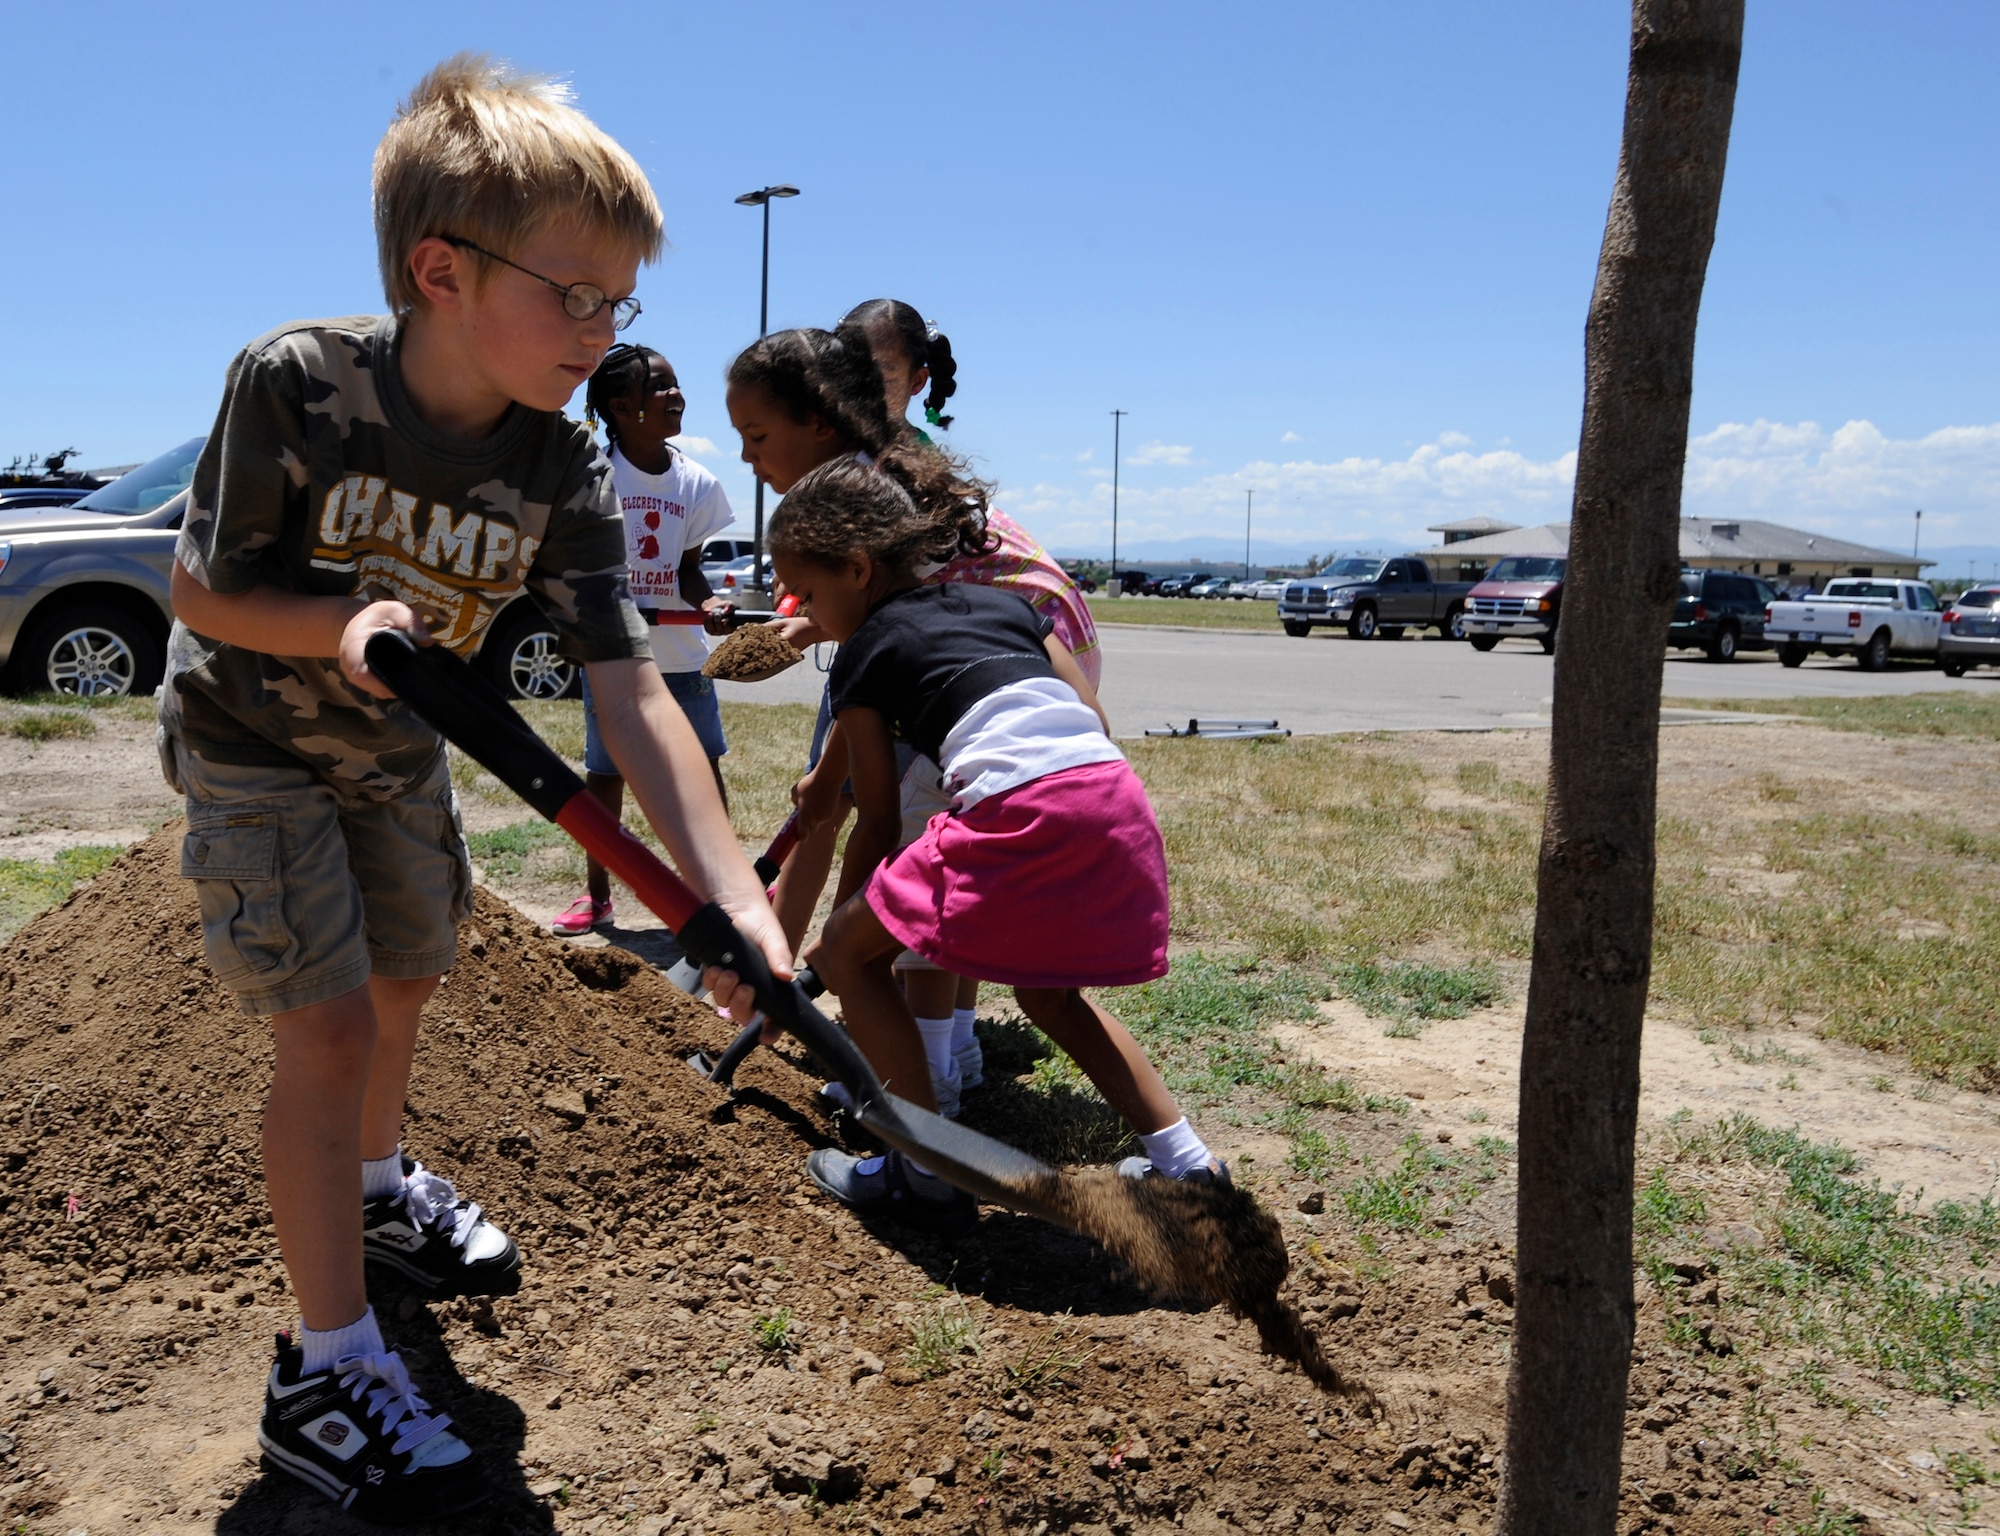 BUCKLEY AIR FORCE BASE, Colo. -- Six-year-old Conner Miller, a base dependent, places soil at the base of a newly planted tree during the Arbor Day celebration June 30. (U.S. Air Force photo by Staff Sgt. Dallas Edwards)